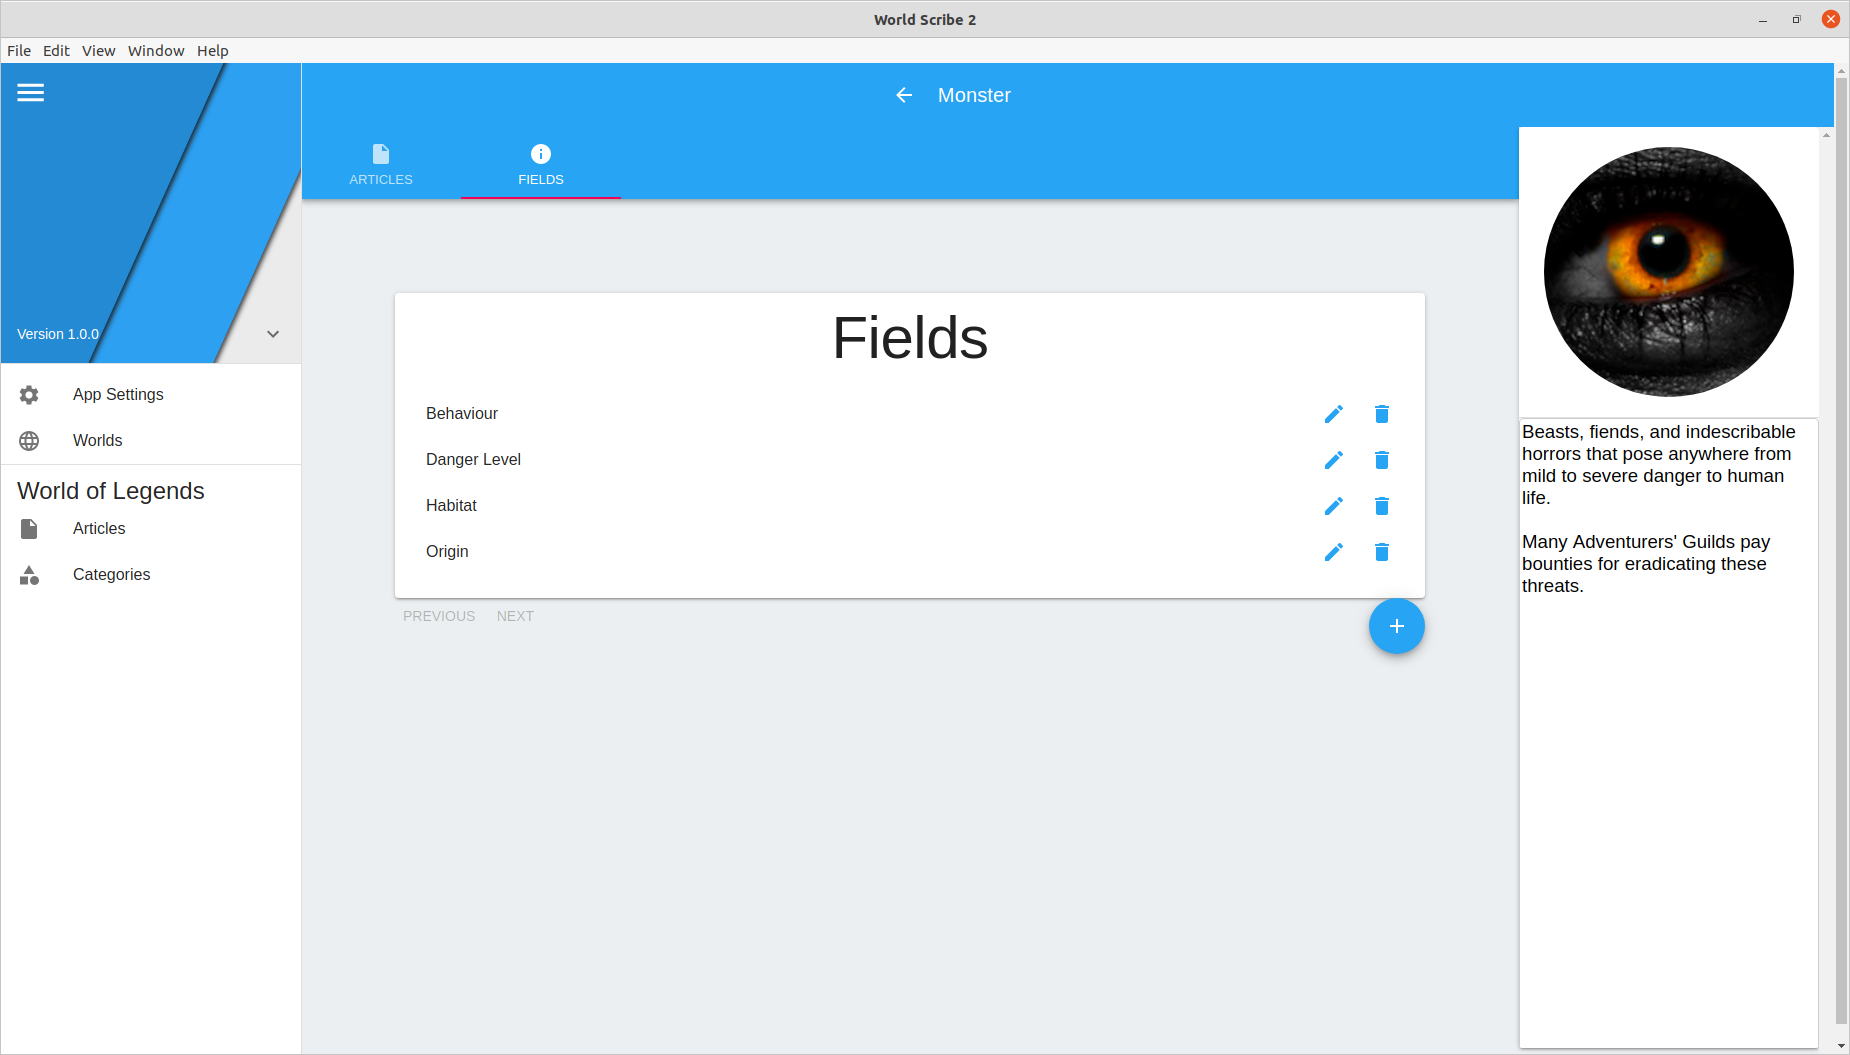 Category - Fields Page